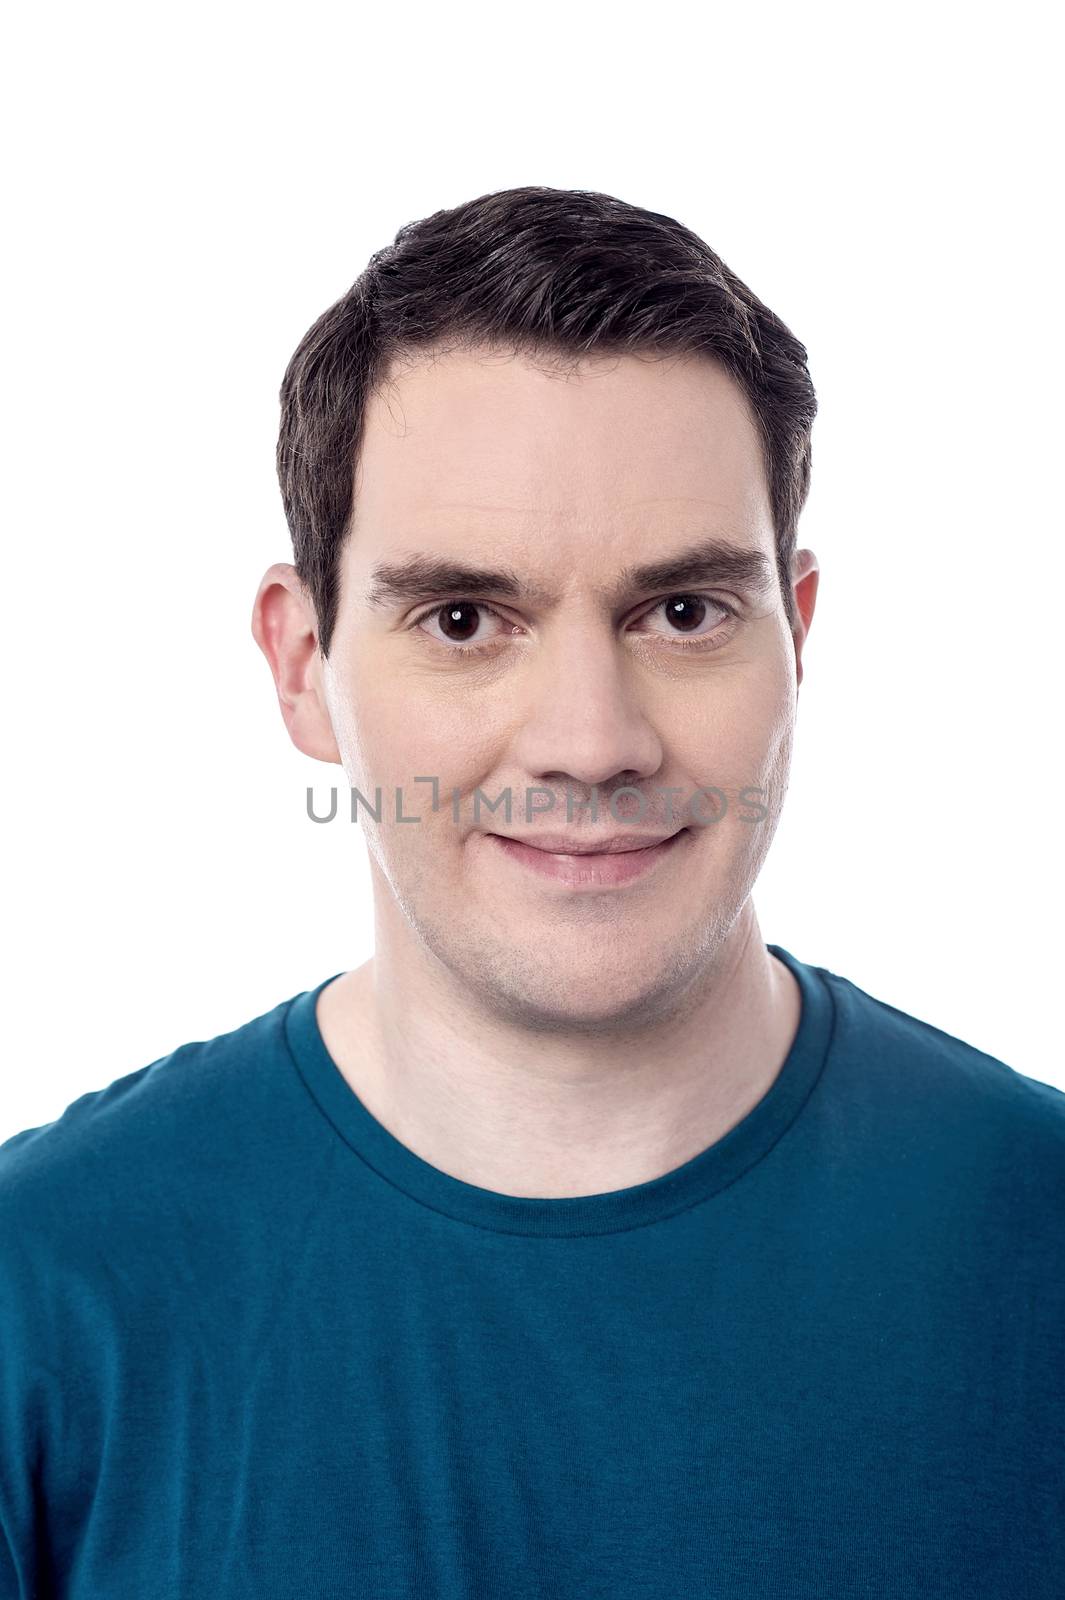 Image of a casual man posing over white background